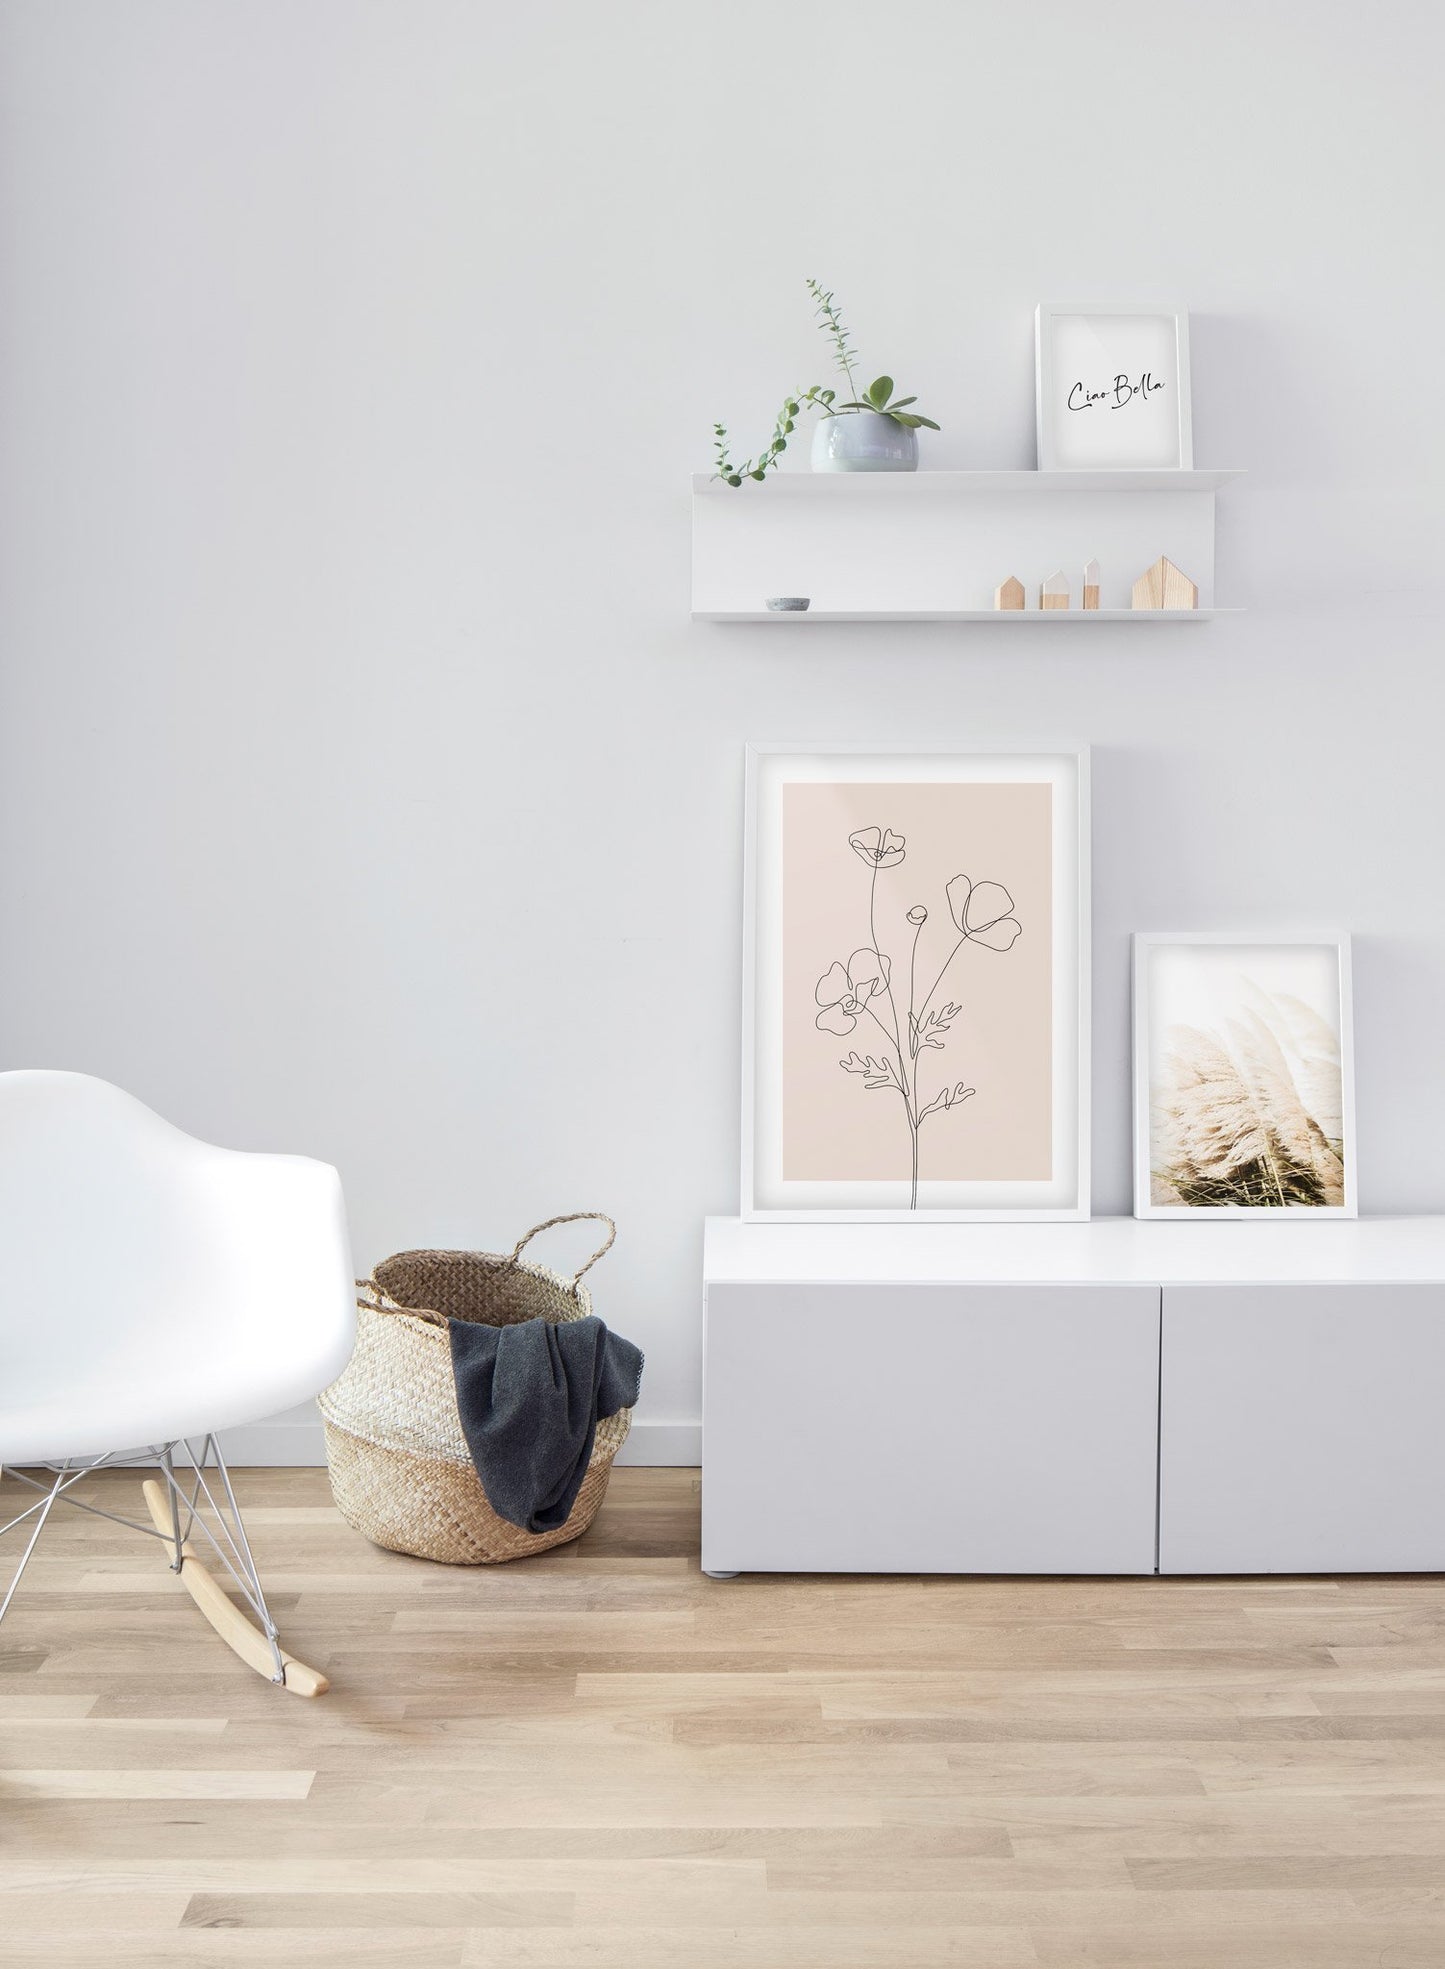 Blowing Grasses modern minimalist photography poster by Opposite Wall - Living room